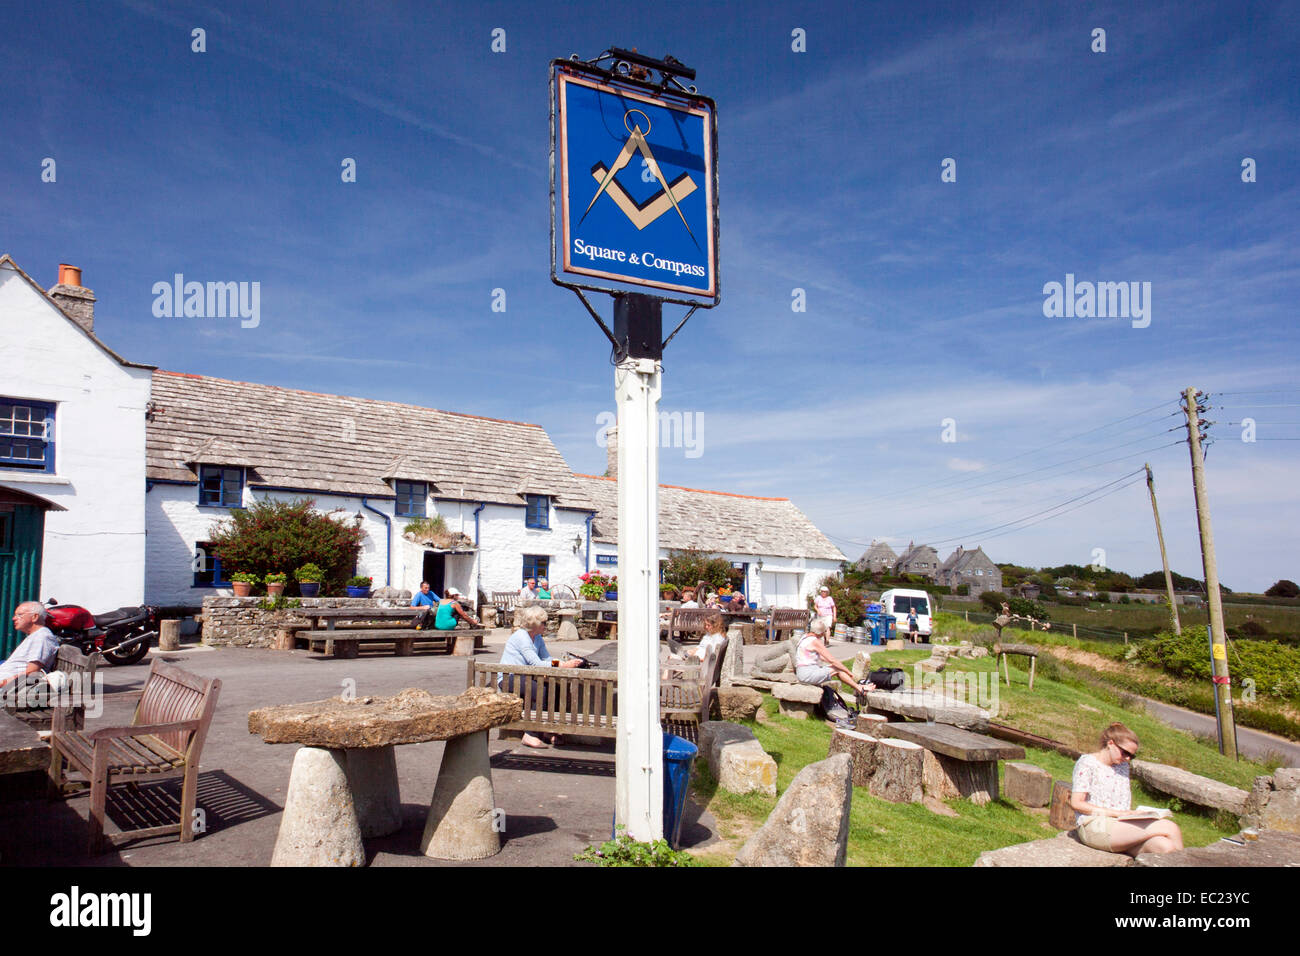 Purbeck stone tables and benches outside the Square and Compass pub in the Dorset village of Worth Matravers England UK Stock Photo